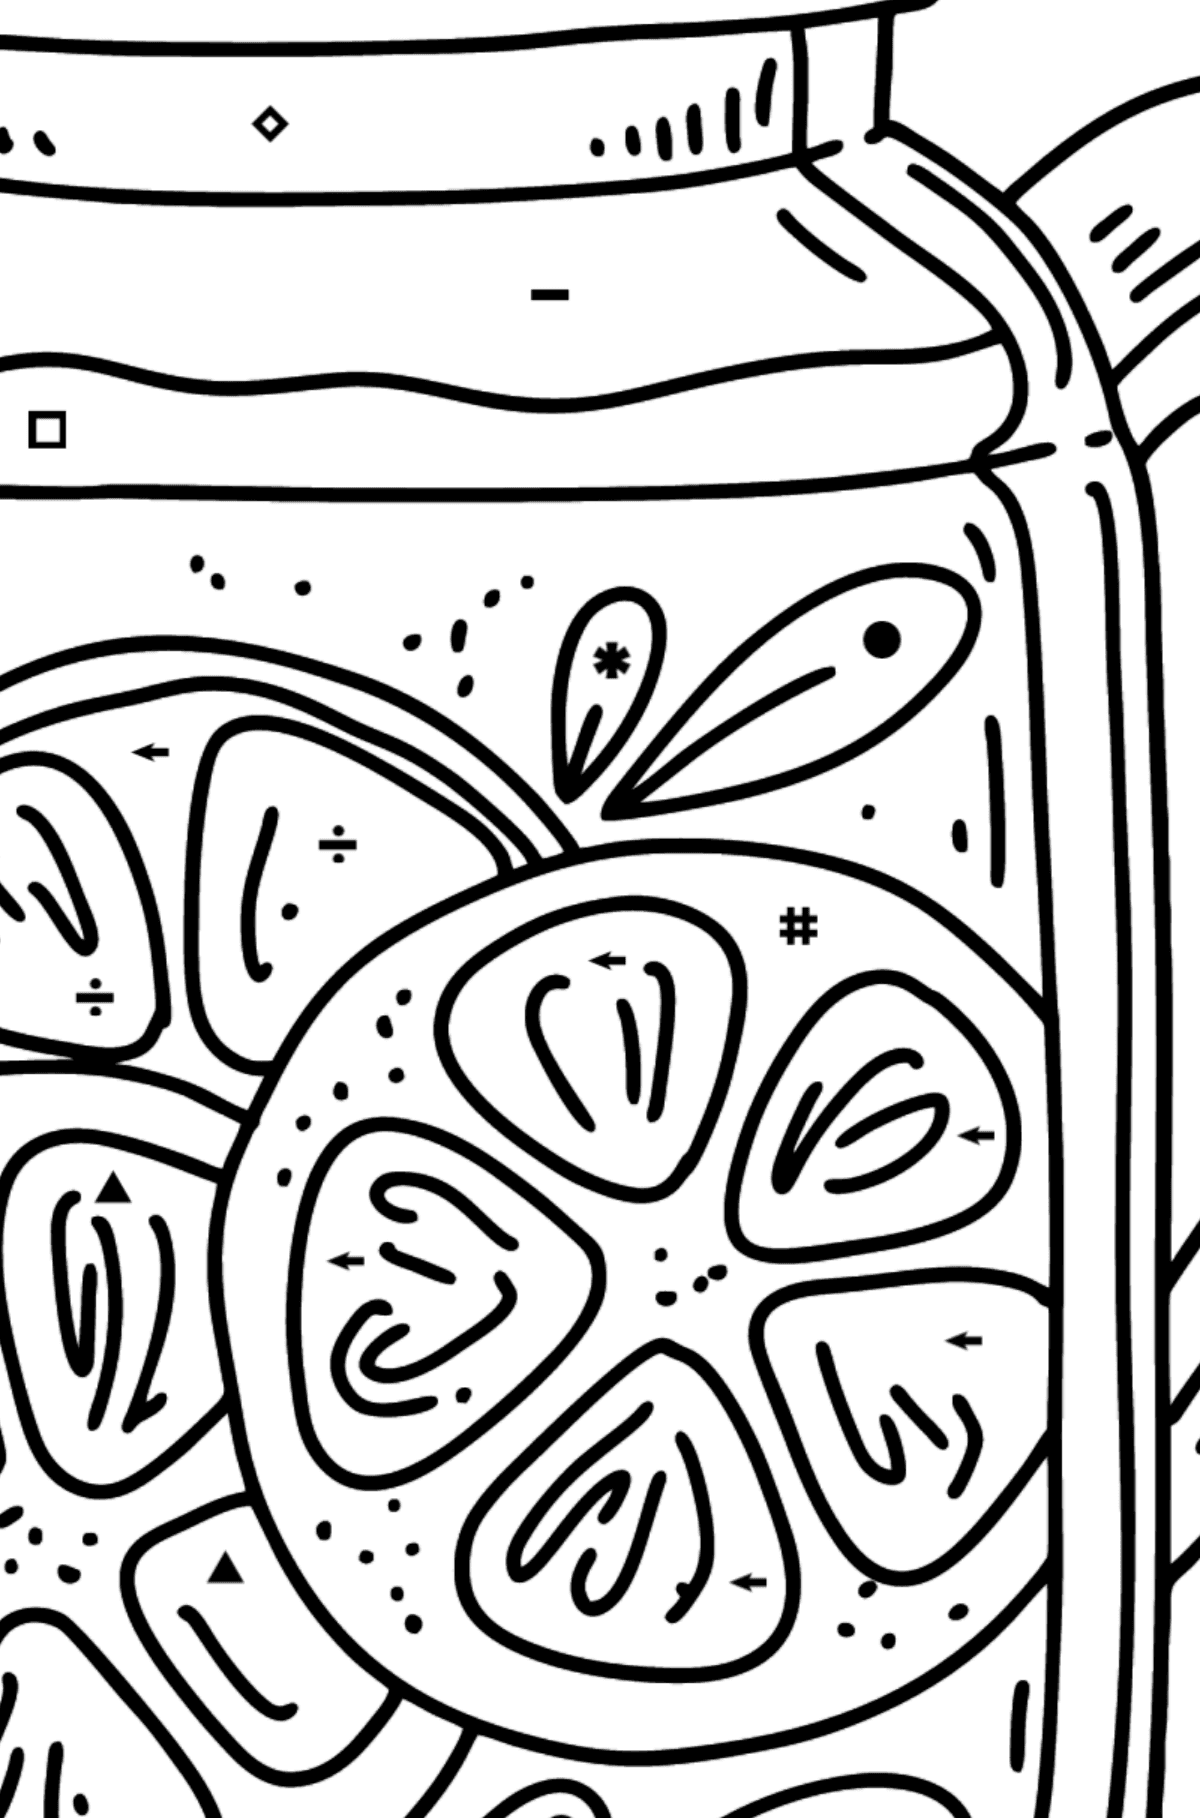 Delicious Lemonade coloring page - Coloring by Symbols for Kids